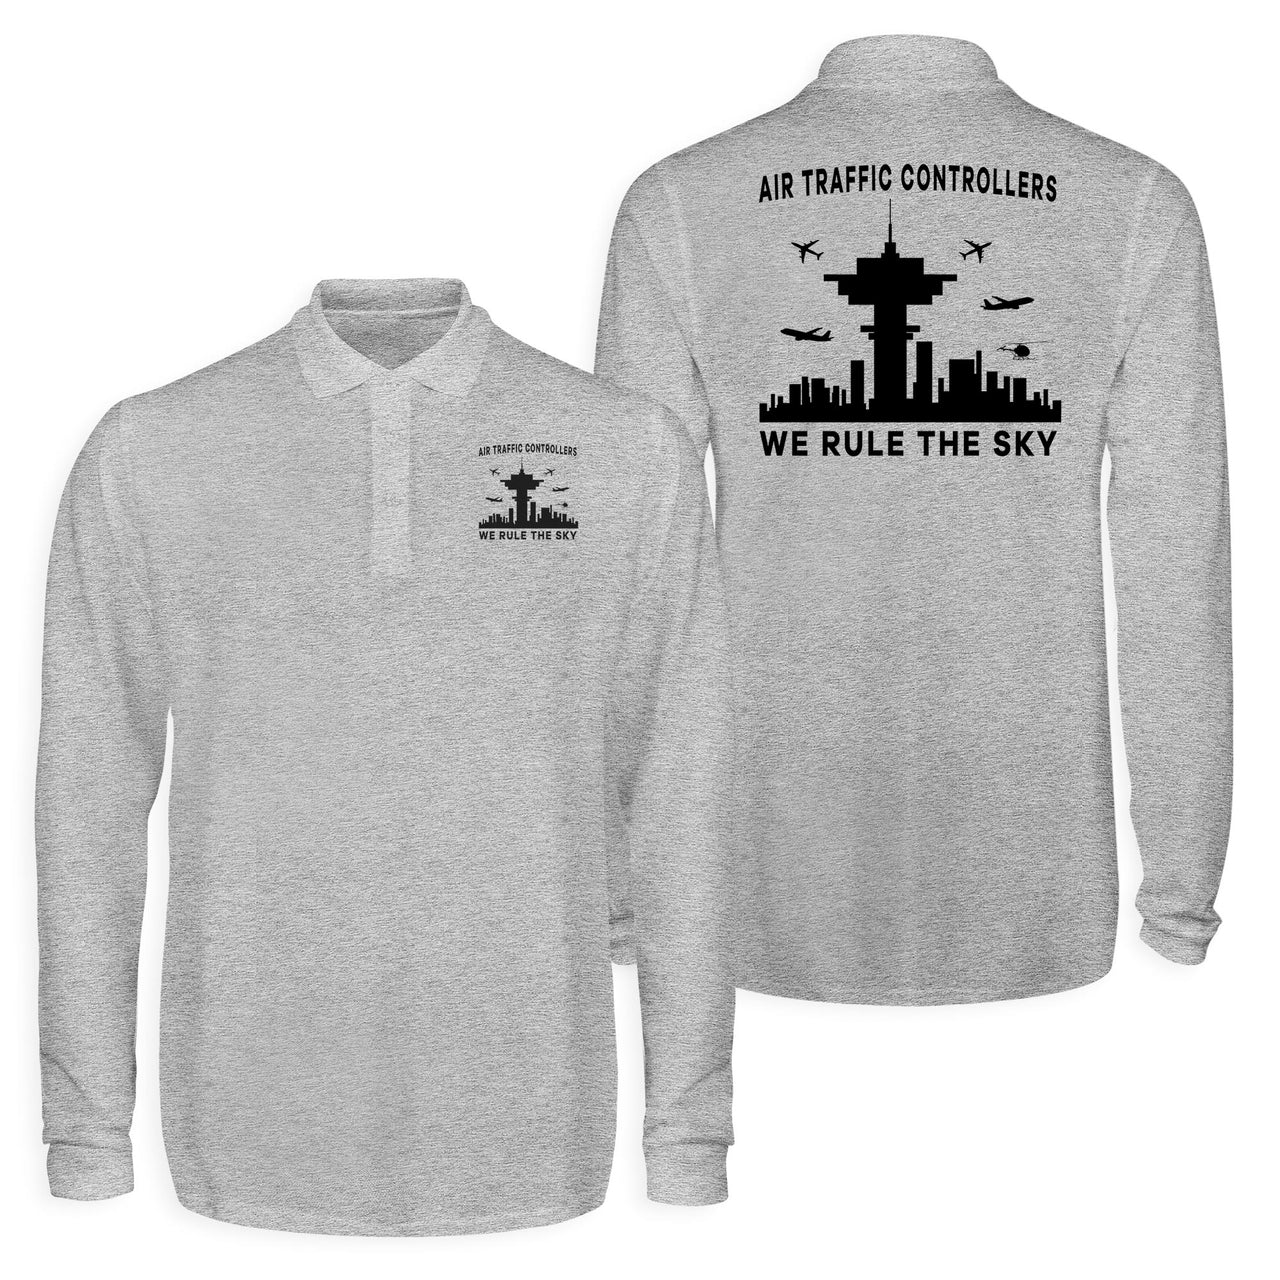 Air Traffic Controllers - We Rule The Sky Designed Long Sleeve Polo T-Shirts (Double-Side)